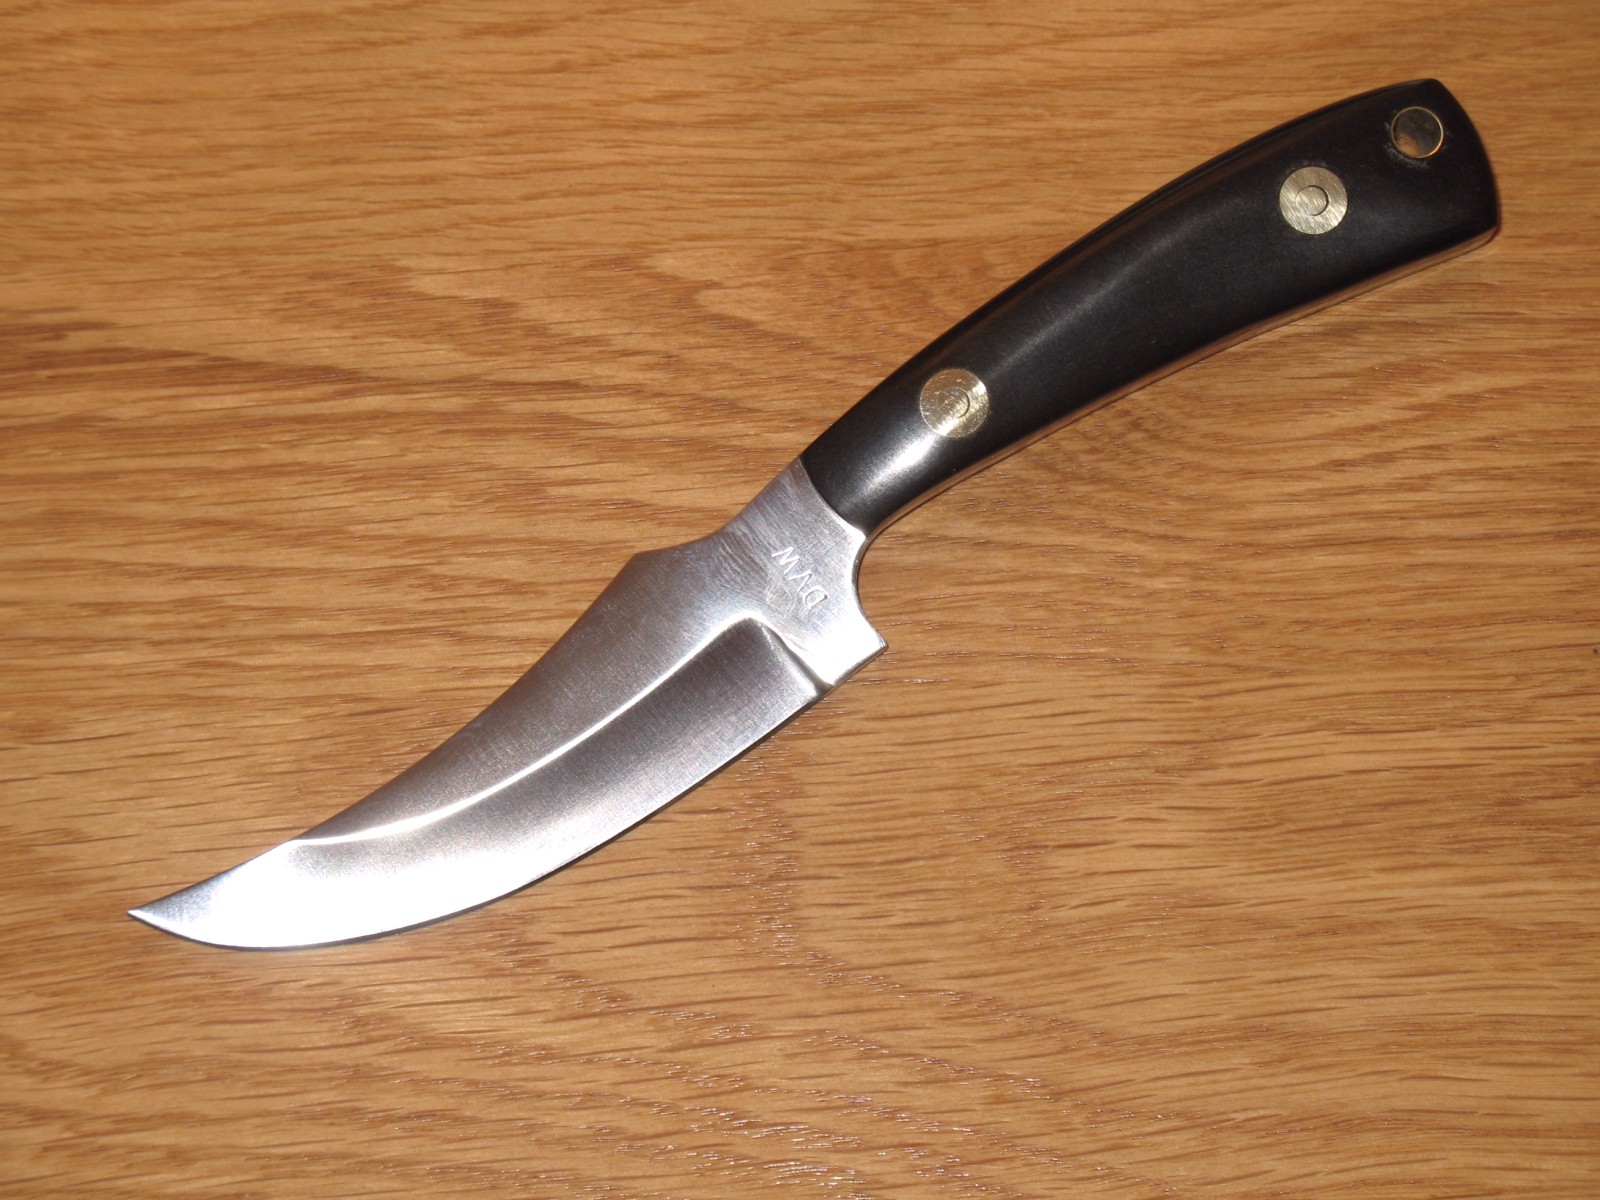 dan-s-knives-another-skinning-knife